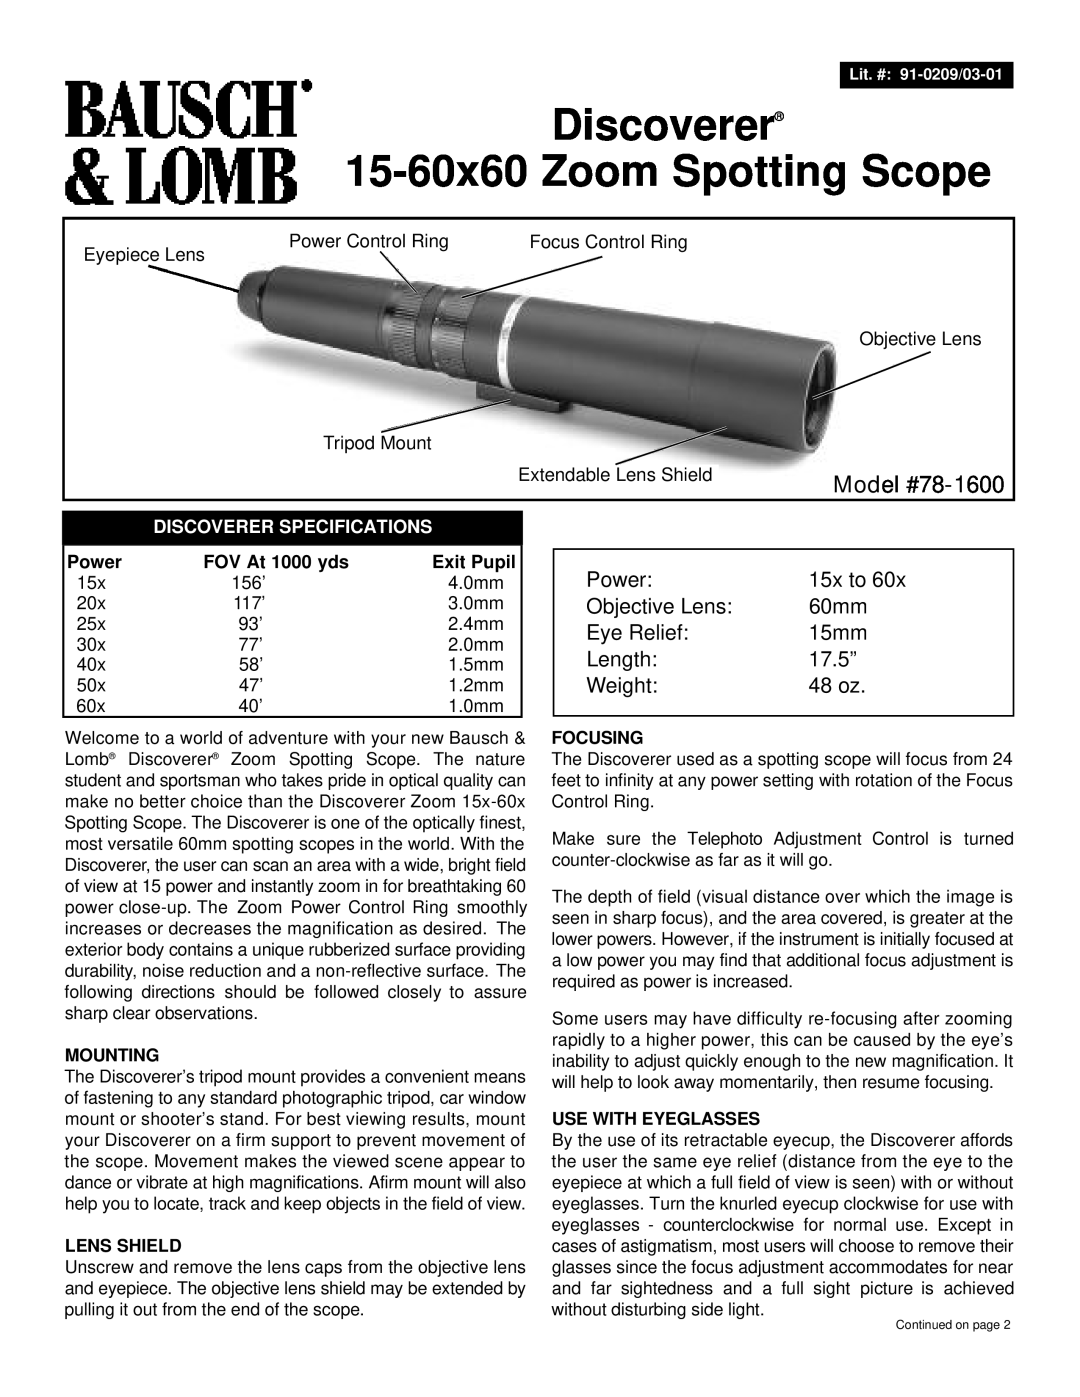 Bausch & Lomb specifications Discoverer 15-60x60 Zoom Spotting Scope, Model #78-1600 